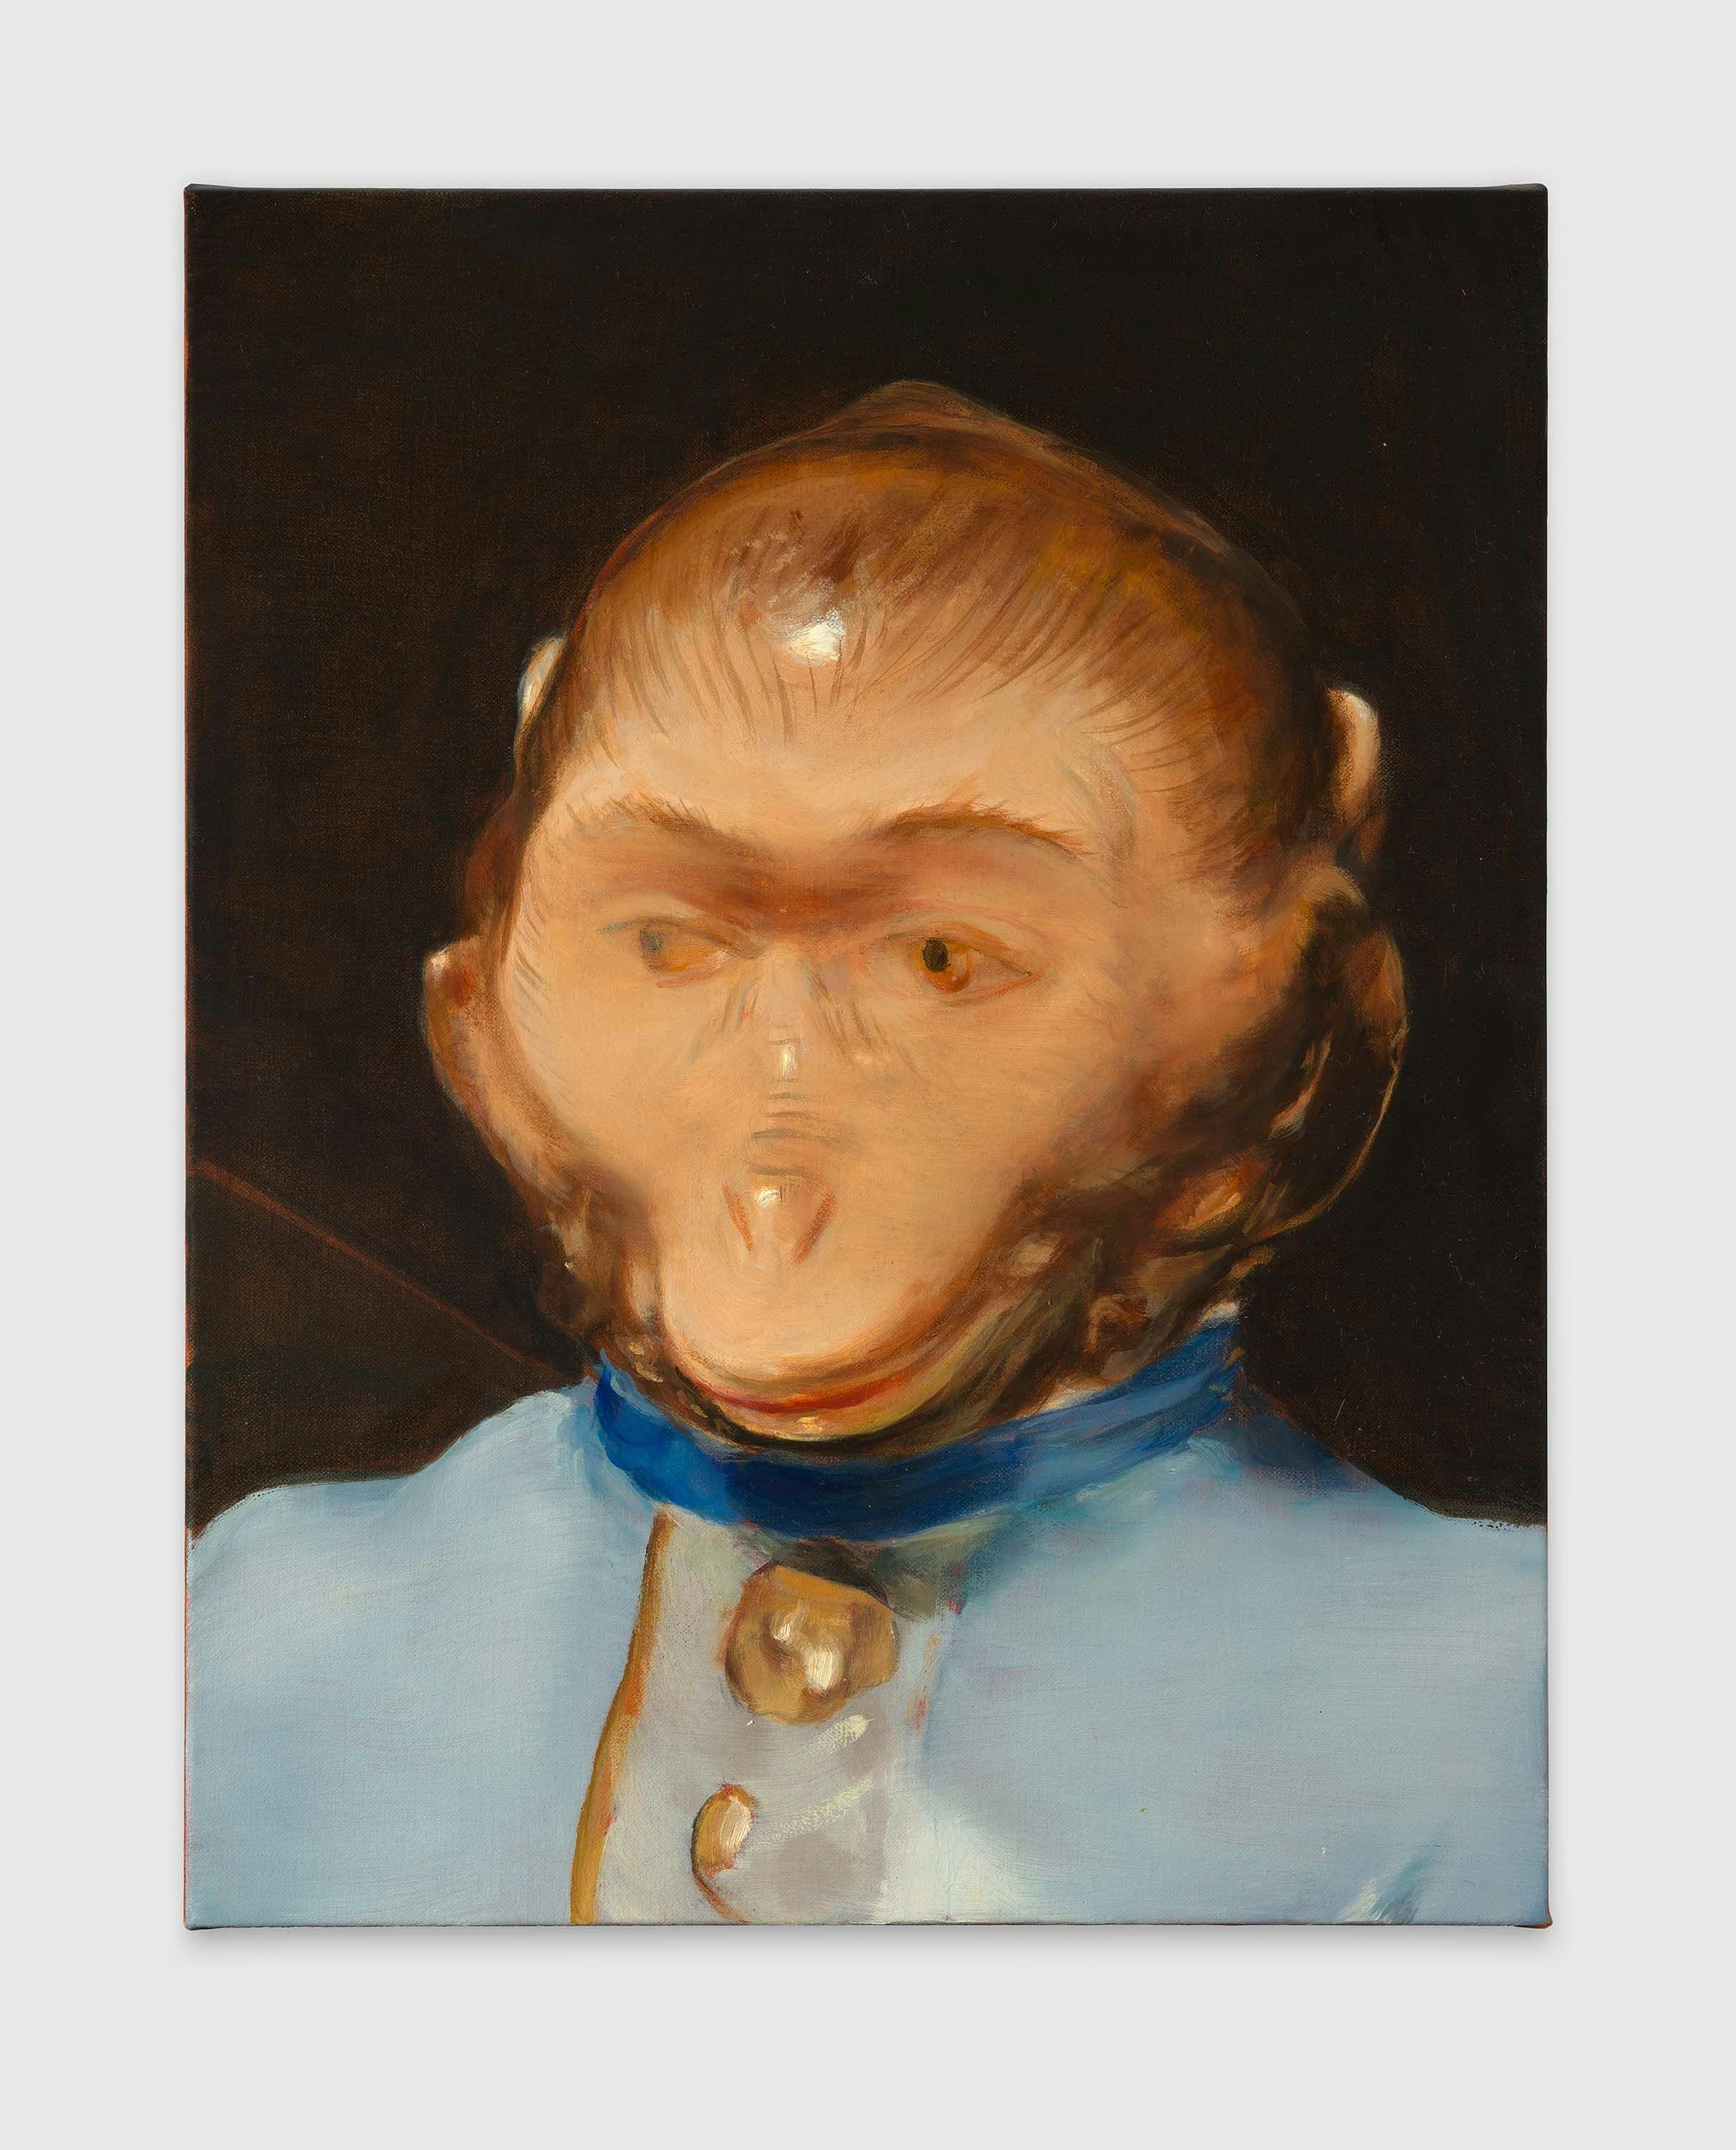 A painting by Michaël Borremans, titled The Monkey (The Queen), dated 2023.